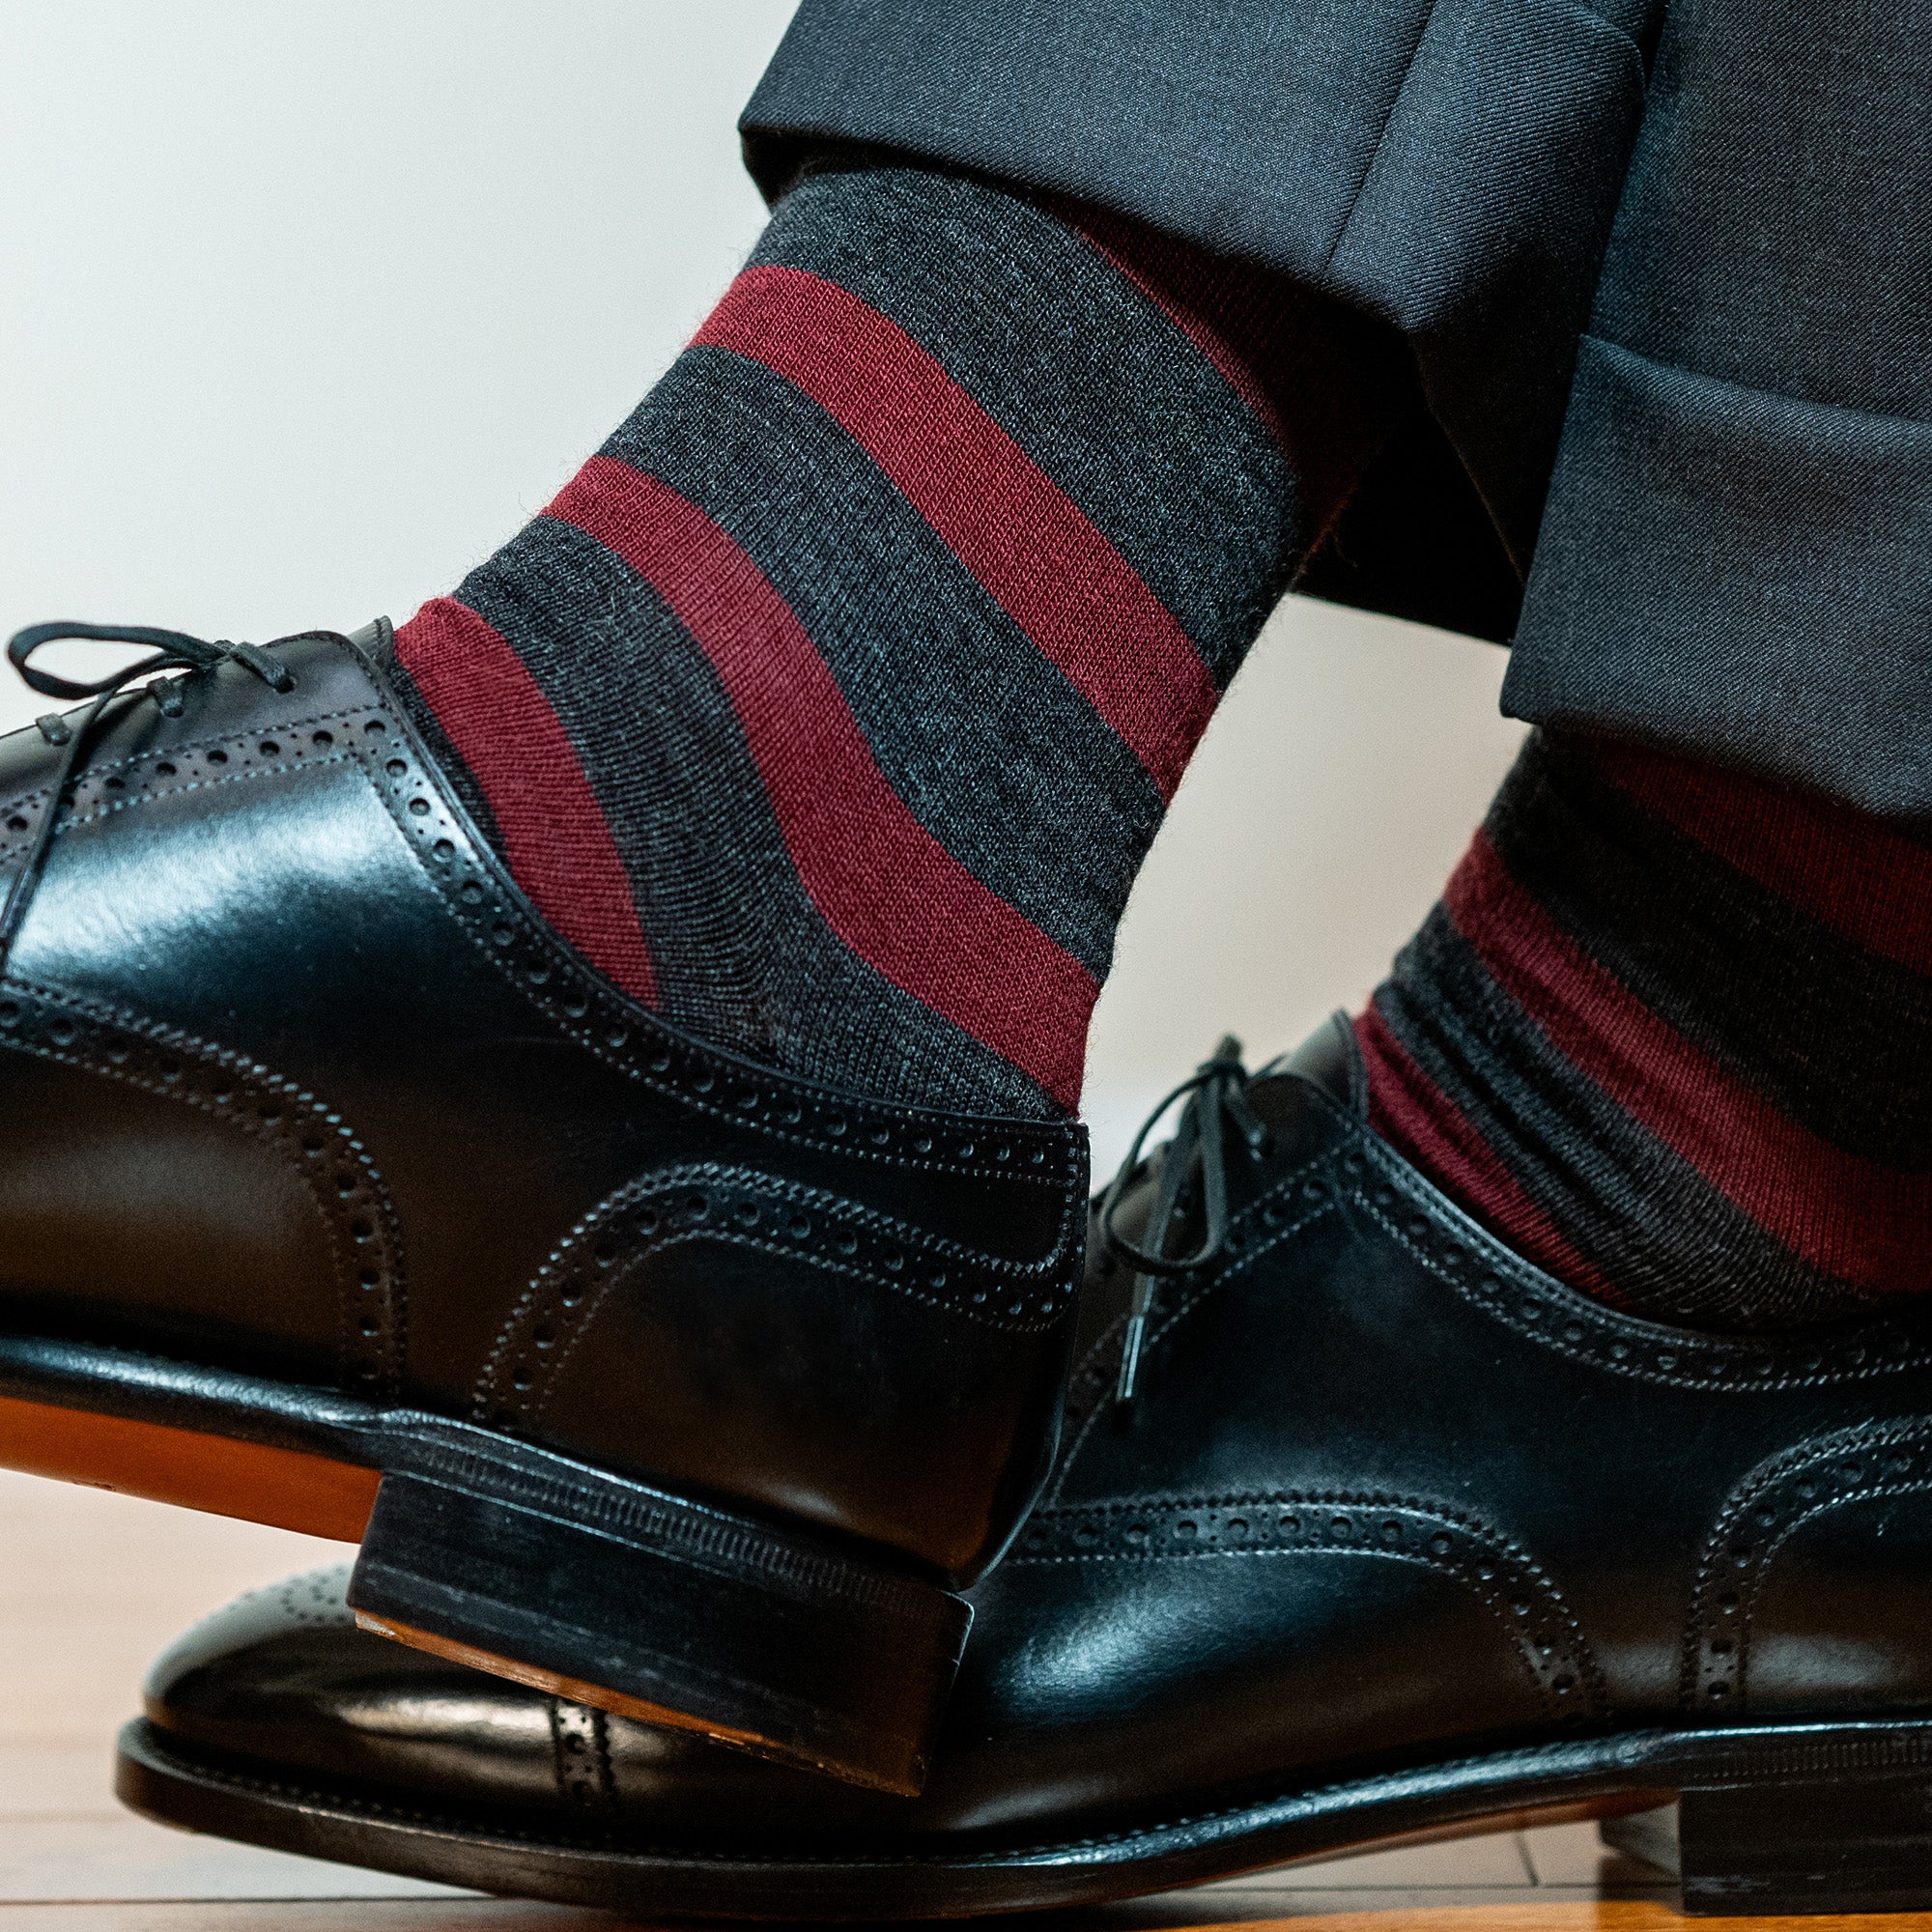 man wearing burgundy and charcoal striped dress socks crossing ankles